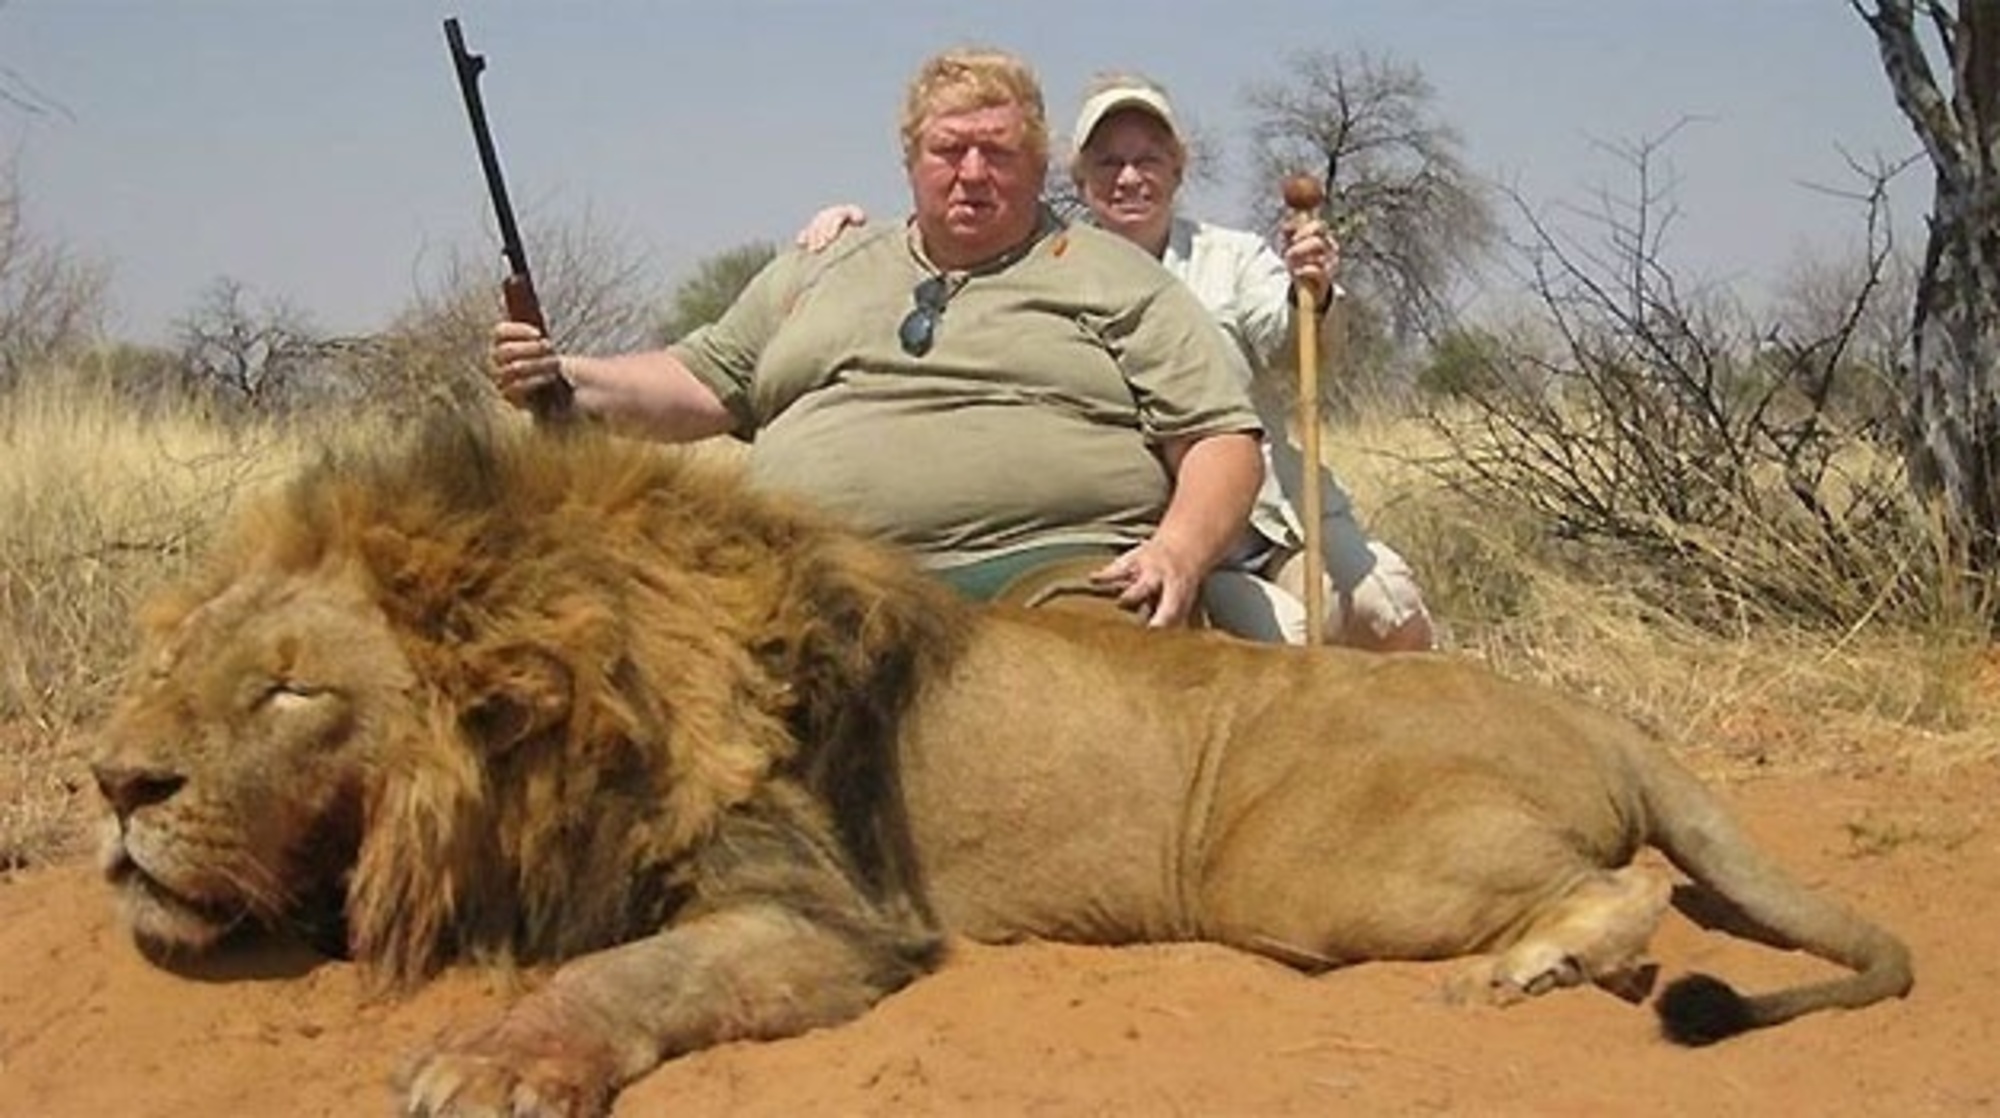 Airlines Have Started Refusing To Ship Hunting Trophies! - Higher ...